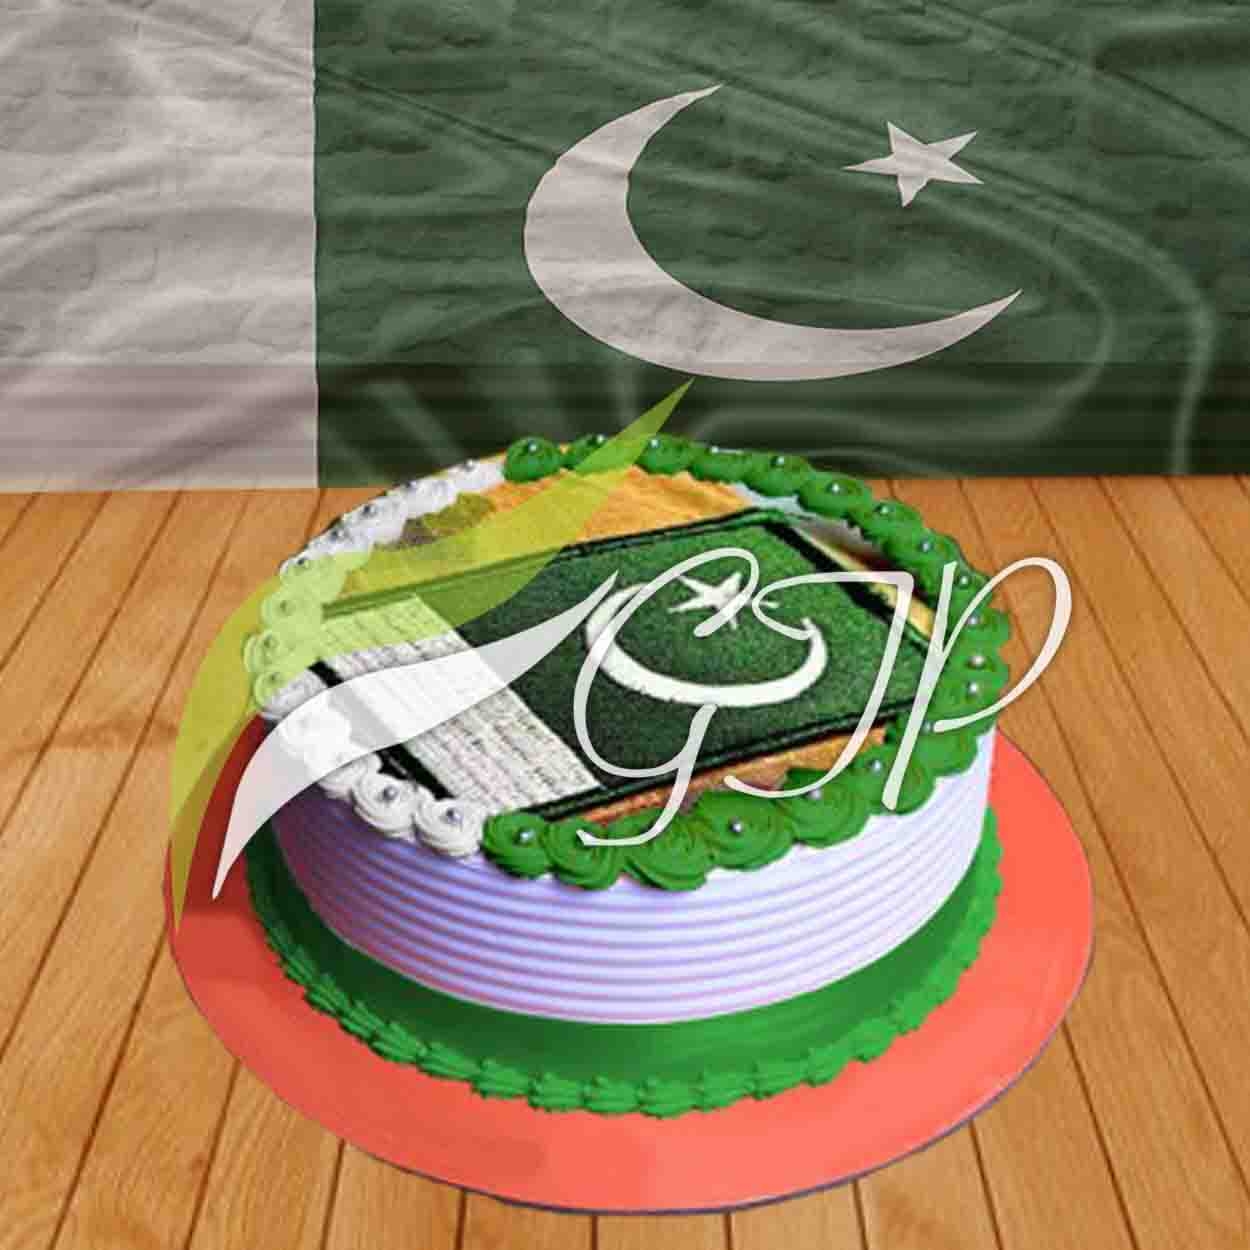 Online Pakistani Flag Cake 8 Portions Gift Delivery in UAE - FNP